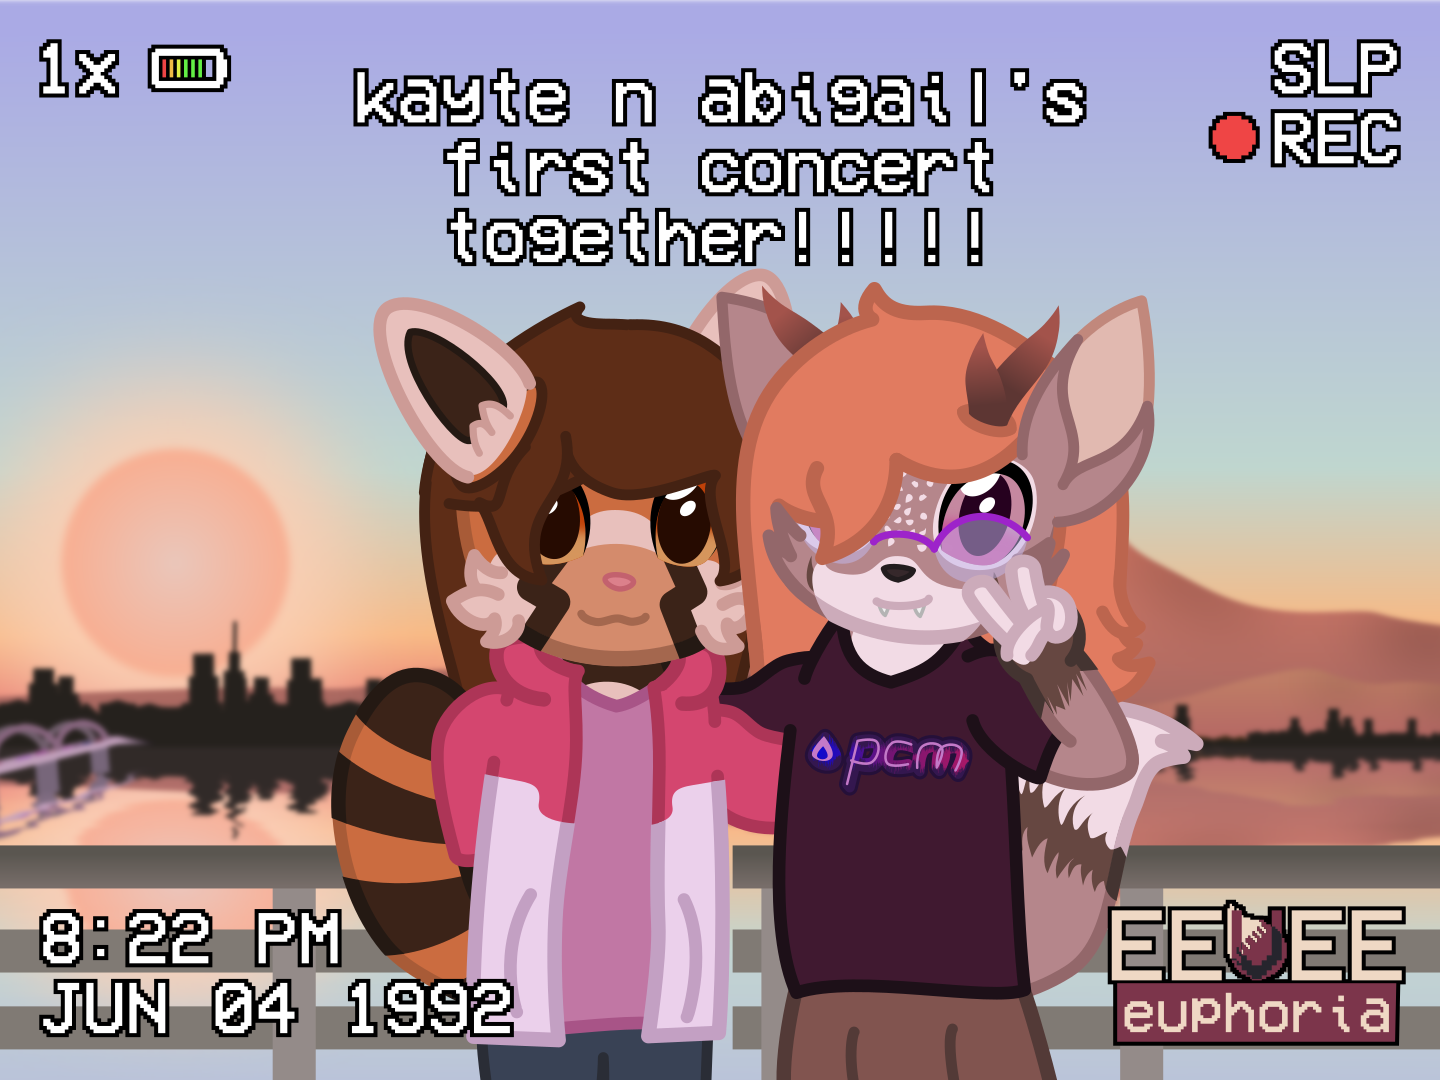 a deerfox and a red panda are shown looking at the viewer, with text saying: kayte n abigail's first concert together!!!!